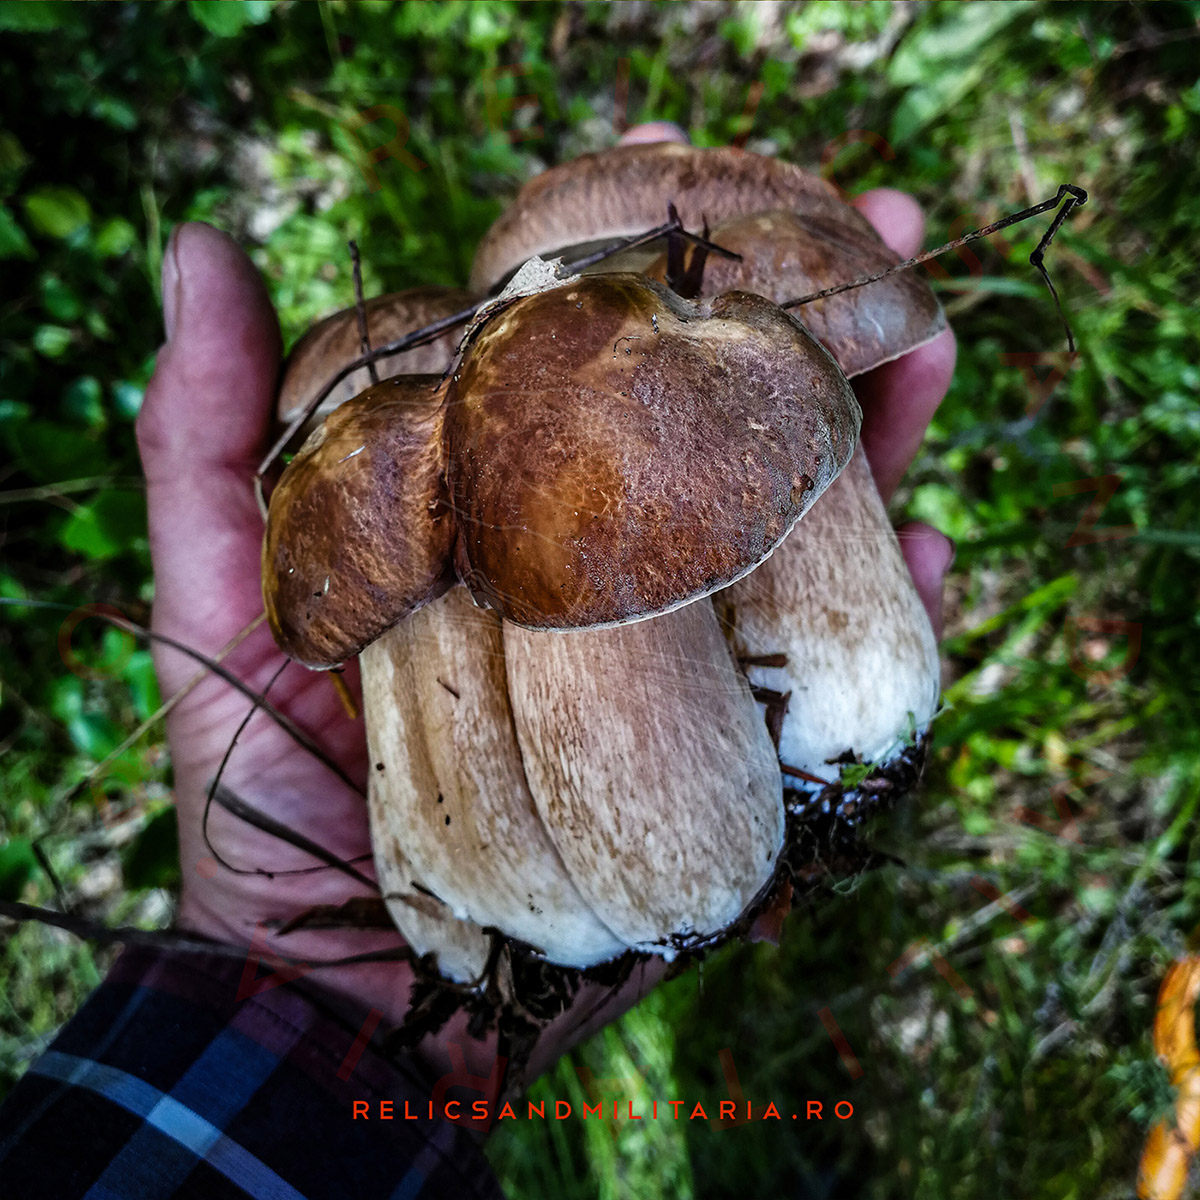 Picking boletus in the Forest